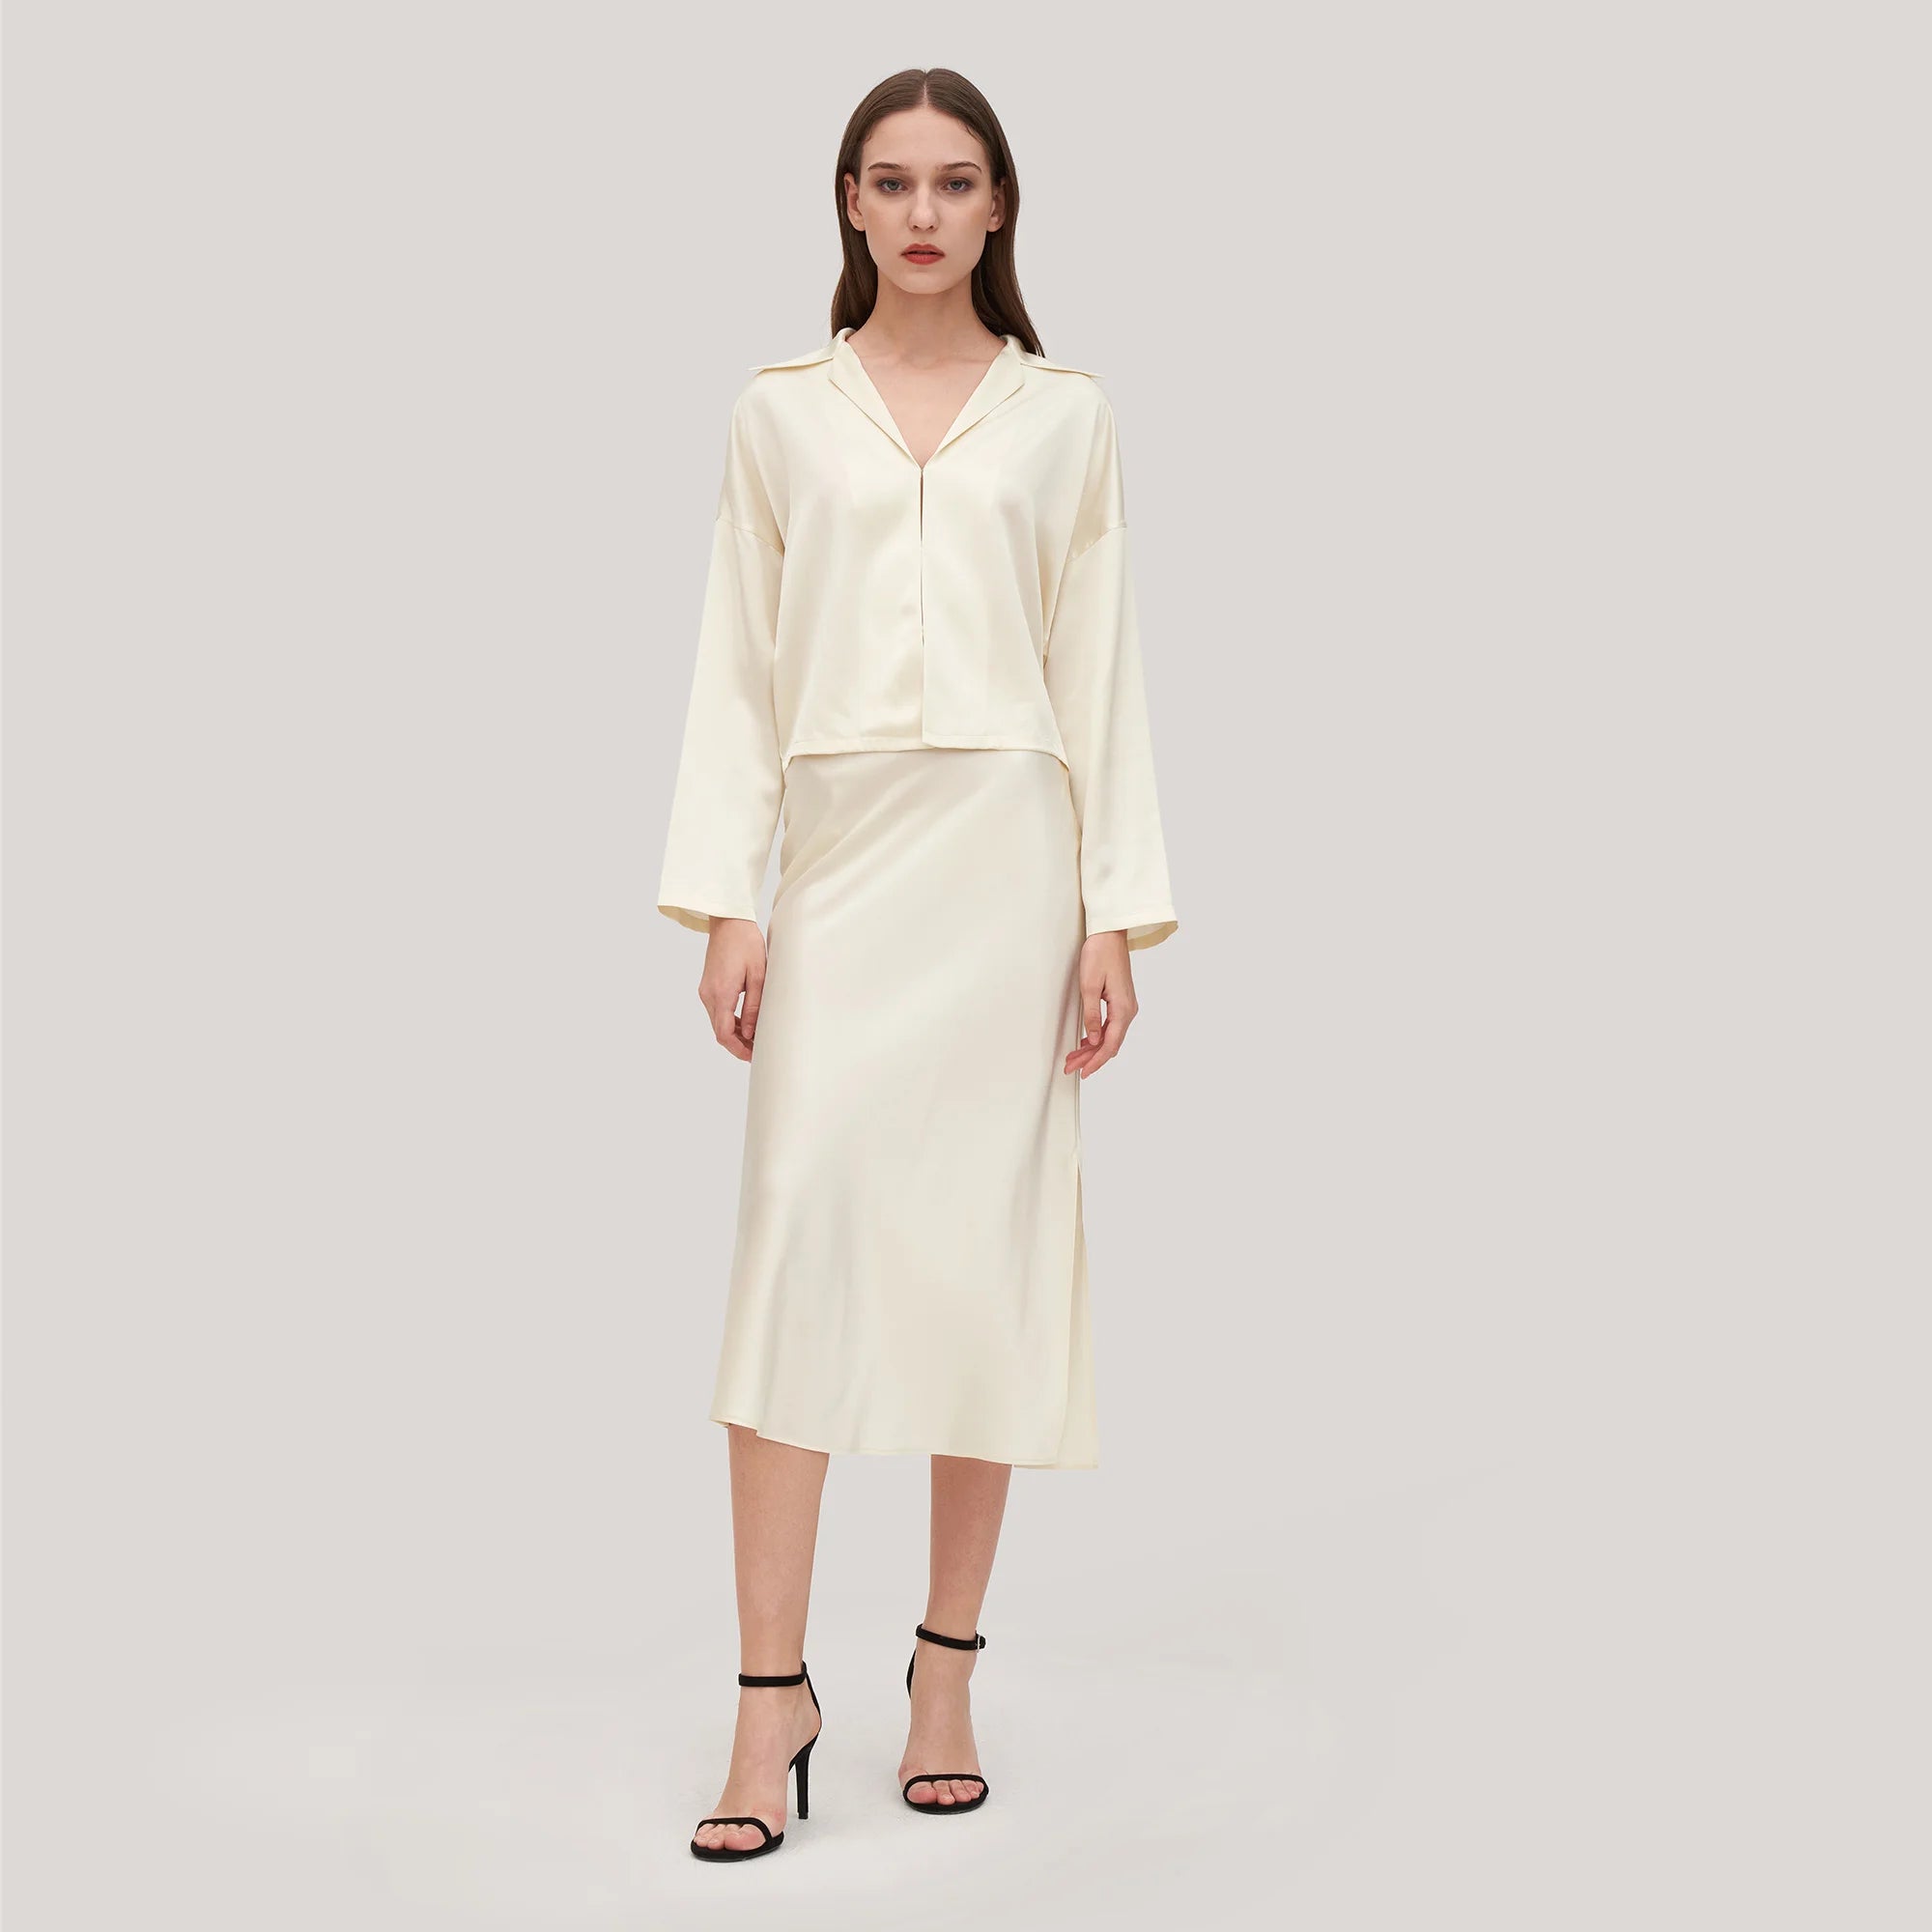 The Ensemble Adeline is the ultimate ladies essential, featuring a minimalist aesthetic with a silk poppy skirt, side slit bottom and femme fit. Perfect for your wardrobe, this ensemble is sure to give your wardrobe an upgrade.